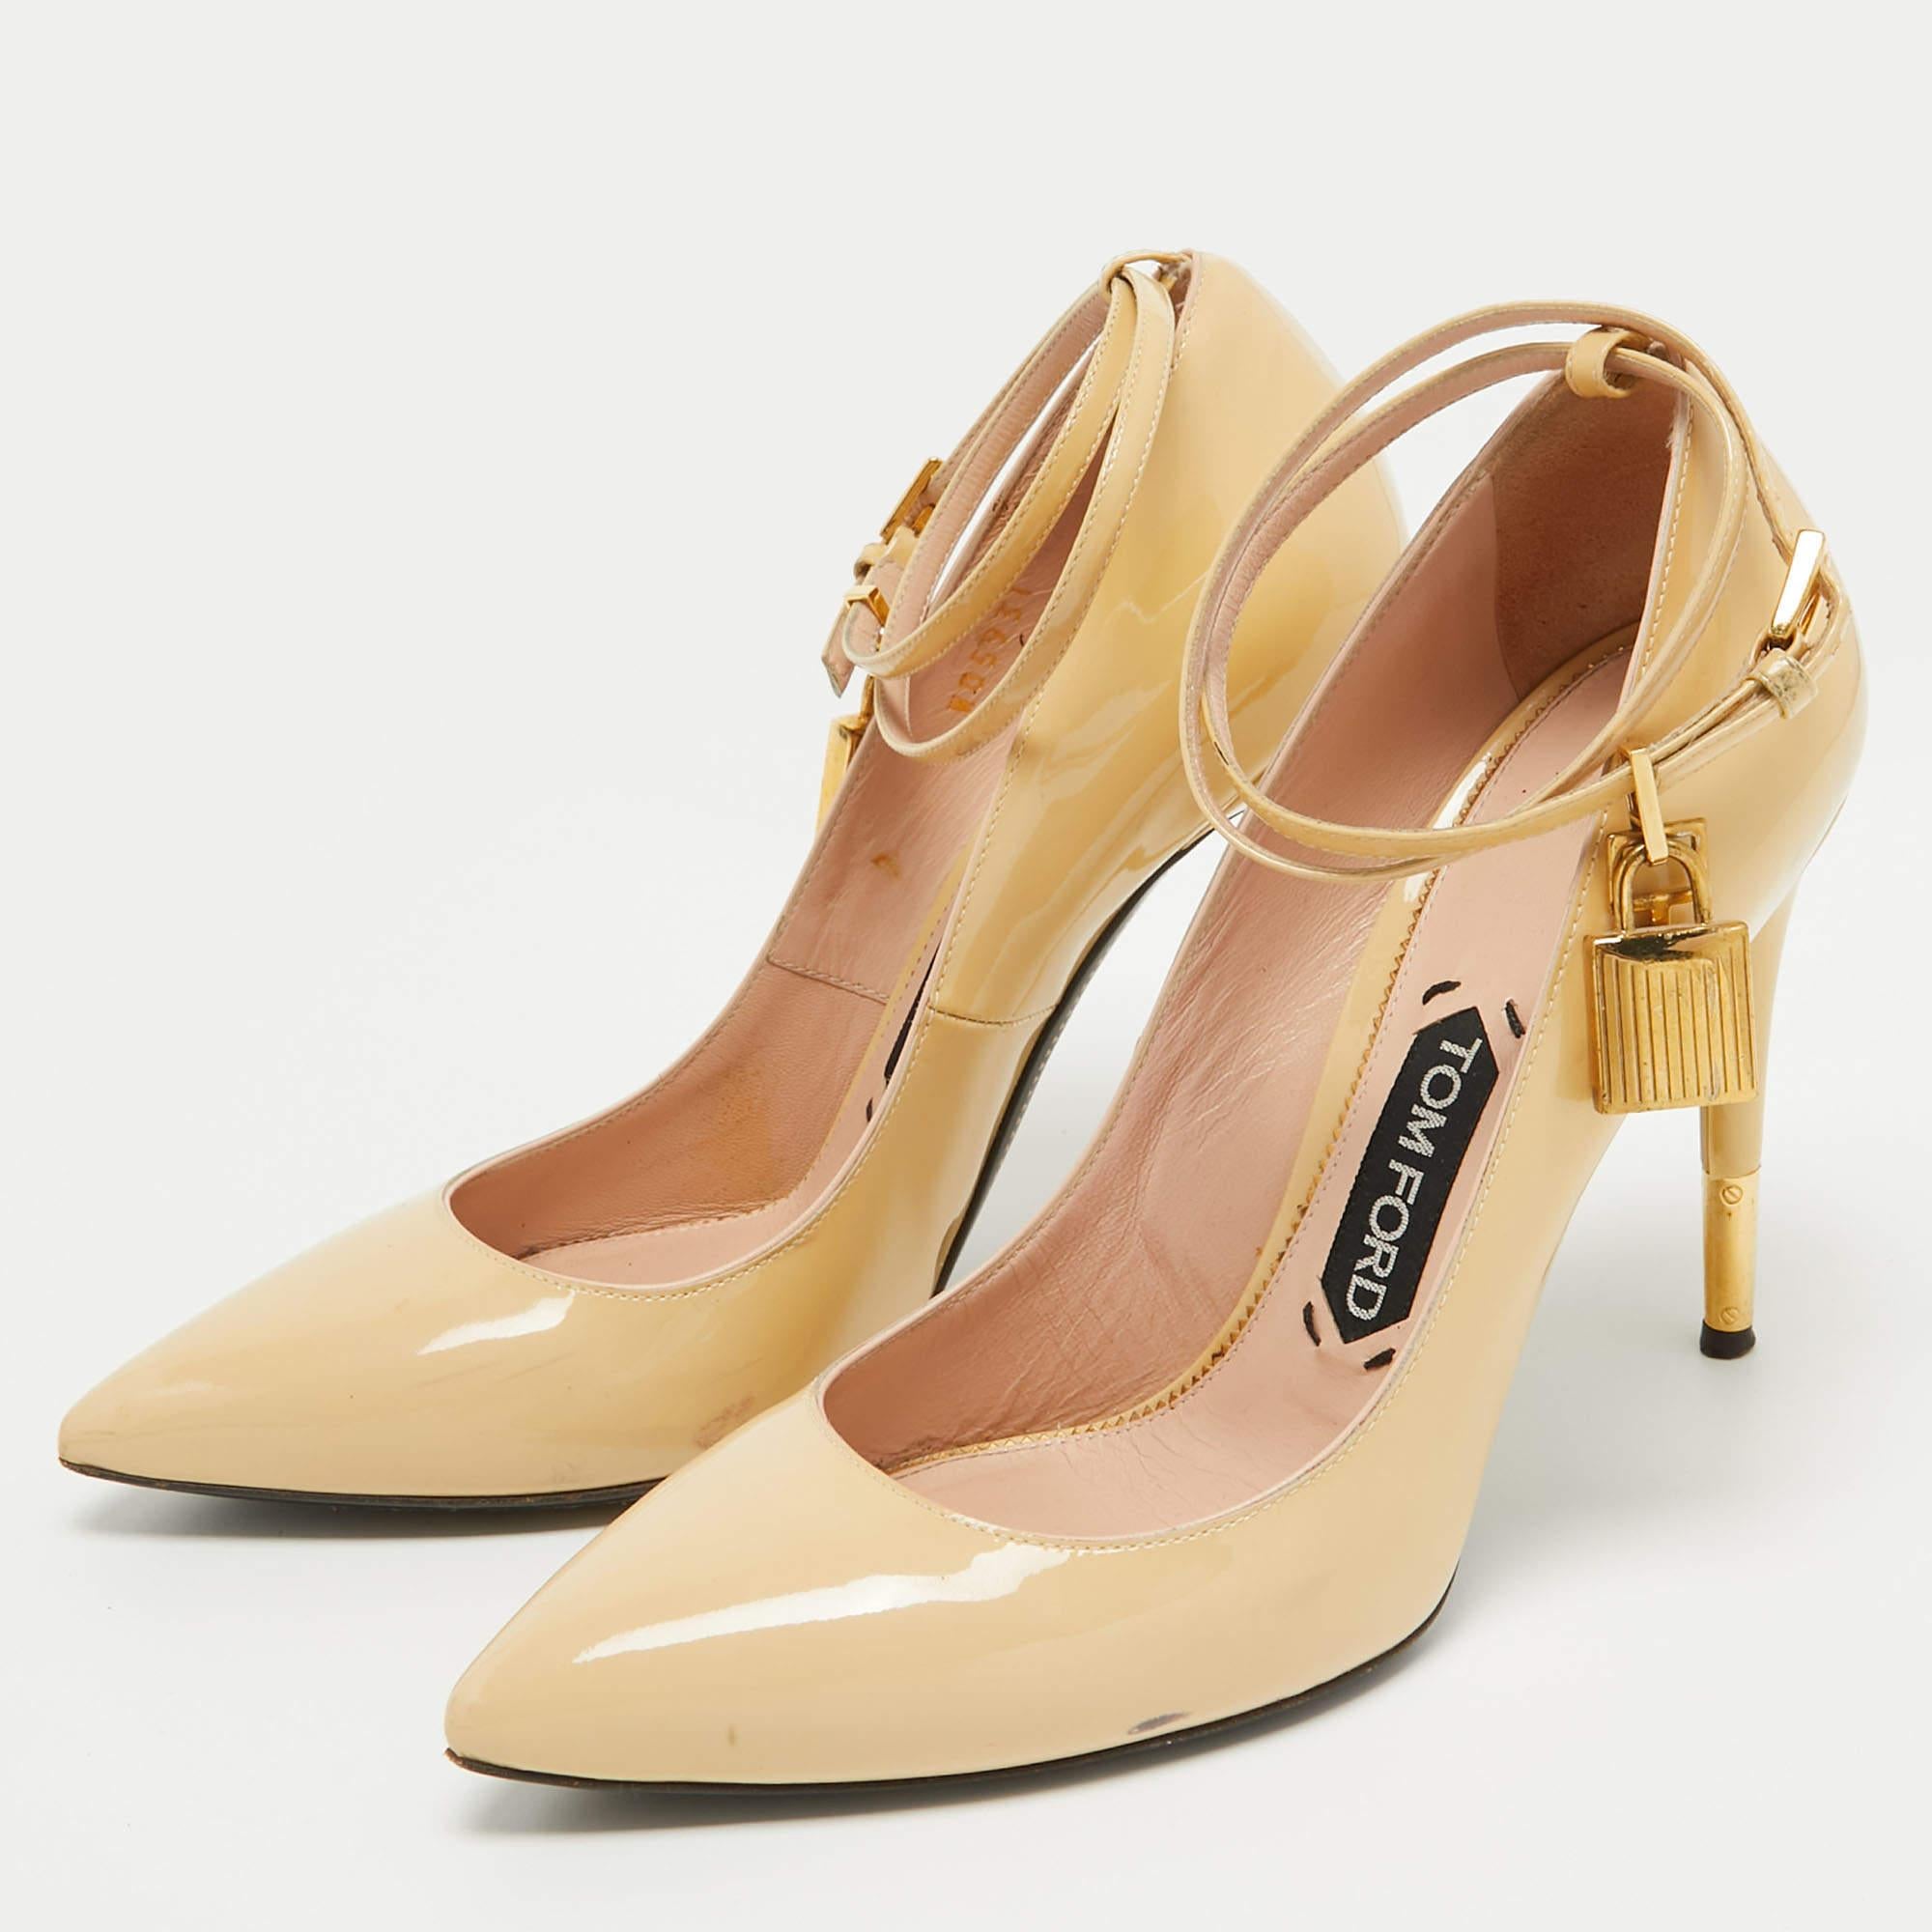 Tom Ford Beige Patent Leather Padlock Pumps Size 38.5 For Sale 1